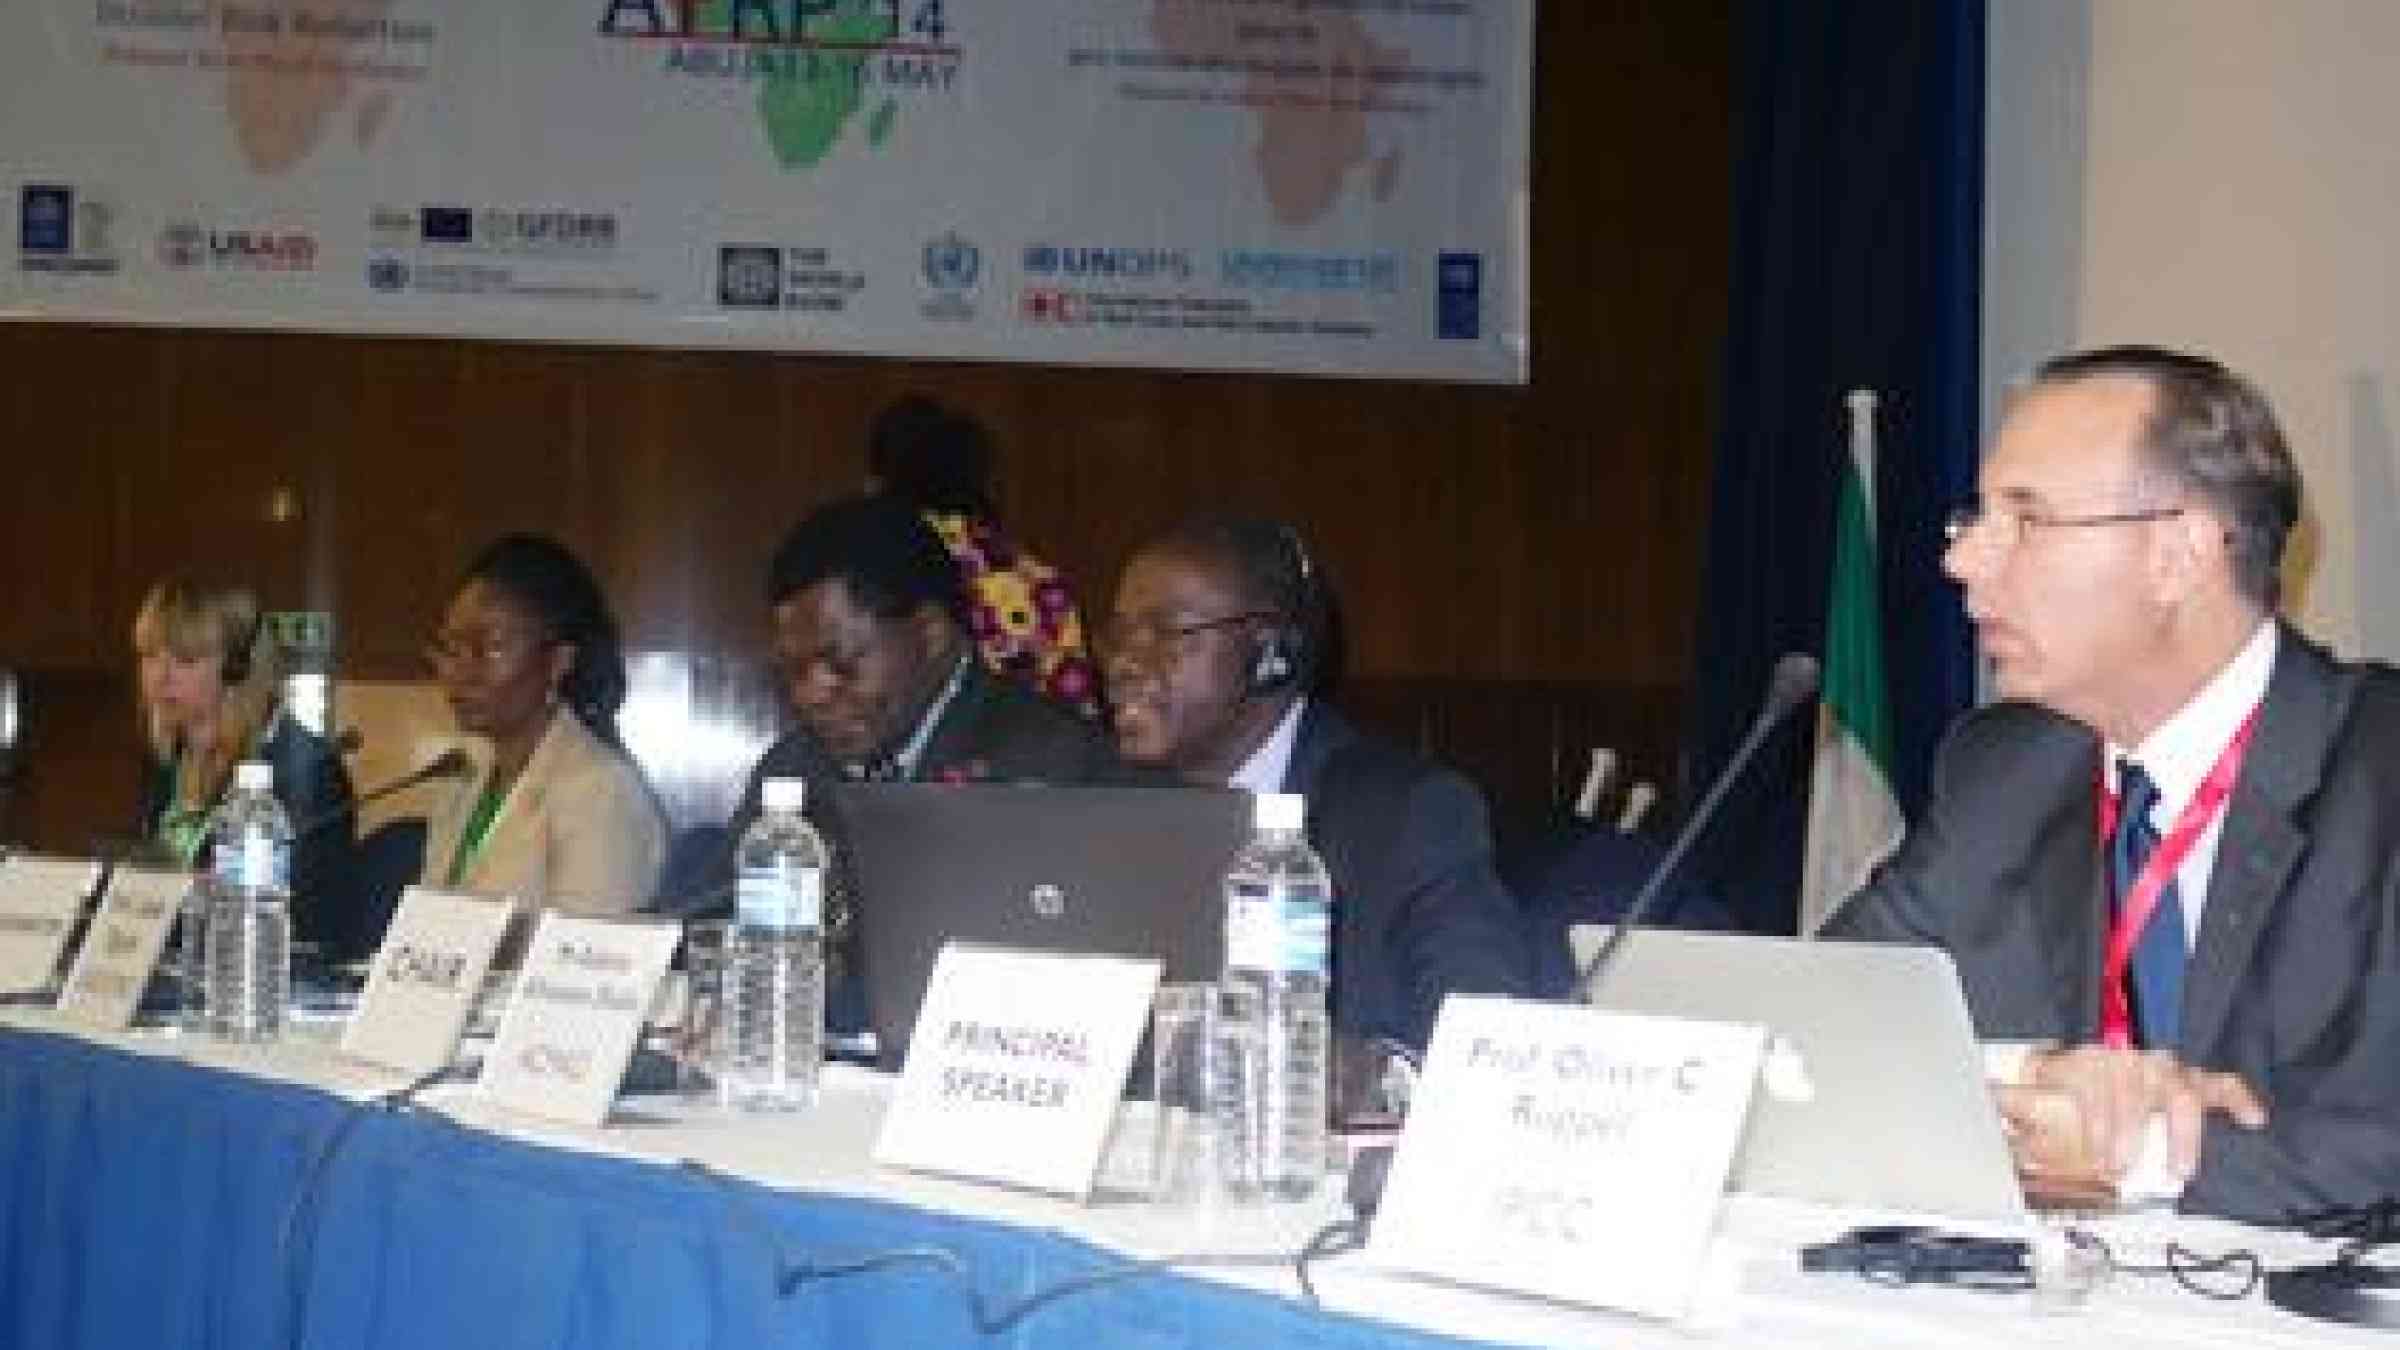 Prof. Oliver Ruppel (extreme right) of the IPCC, keynote speaker on Integrating DRR and Climate Change Adaptation flanked by Chair, Adama Alhassane Diallo, ACMAD, Moderator, Prof. Laban Ogallo, IGAD/ICPAC, Dr. Aida Diongue Niang, Senegal,and Katie Peters, CDKN/ODI. (Photo: UNISDR)